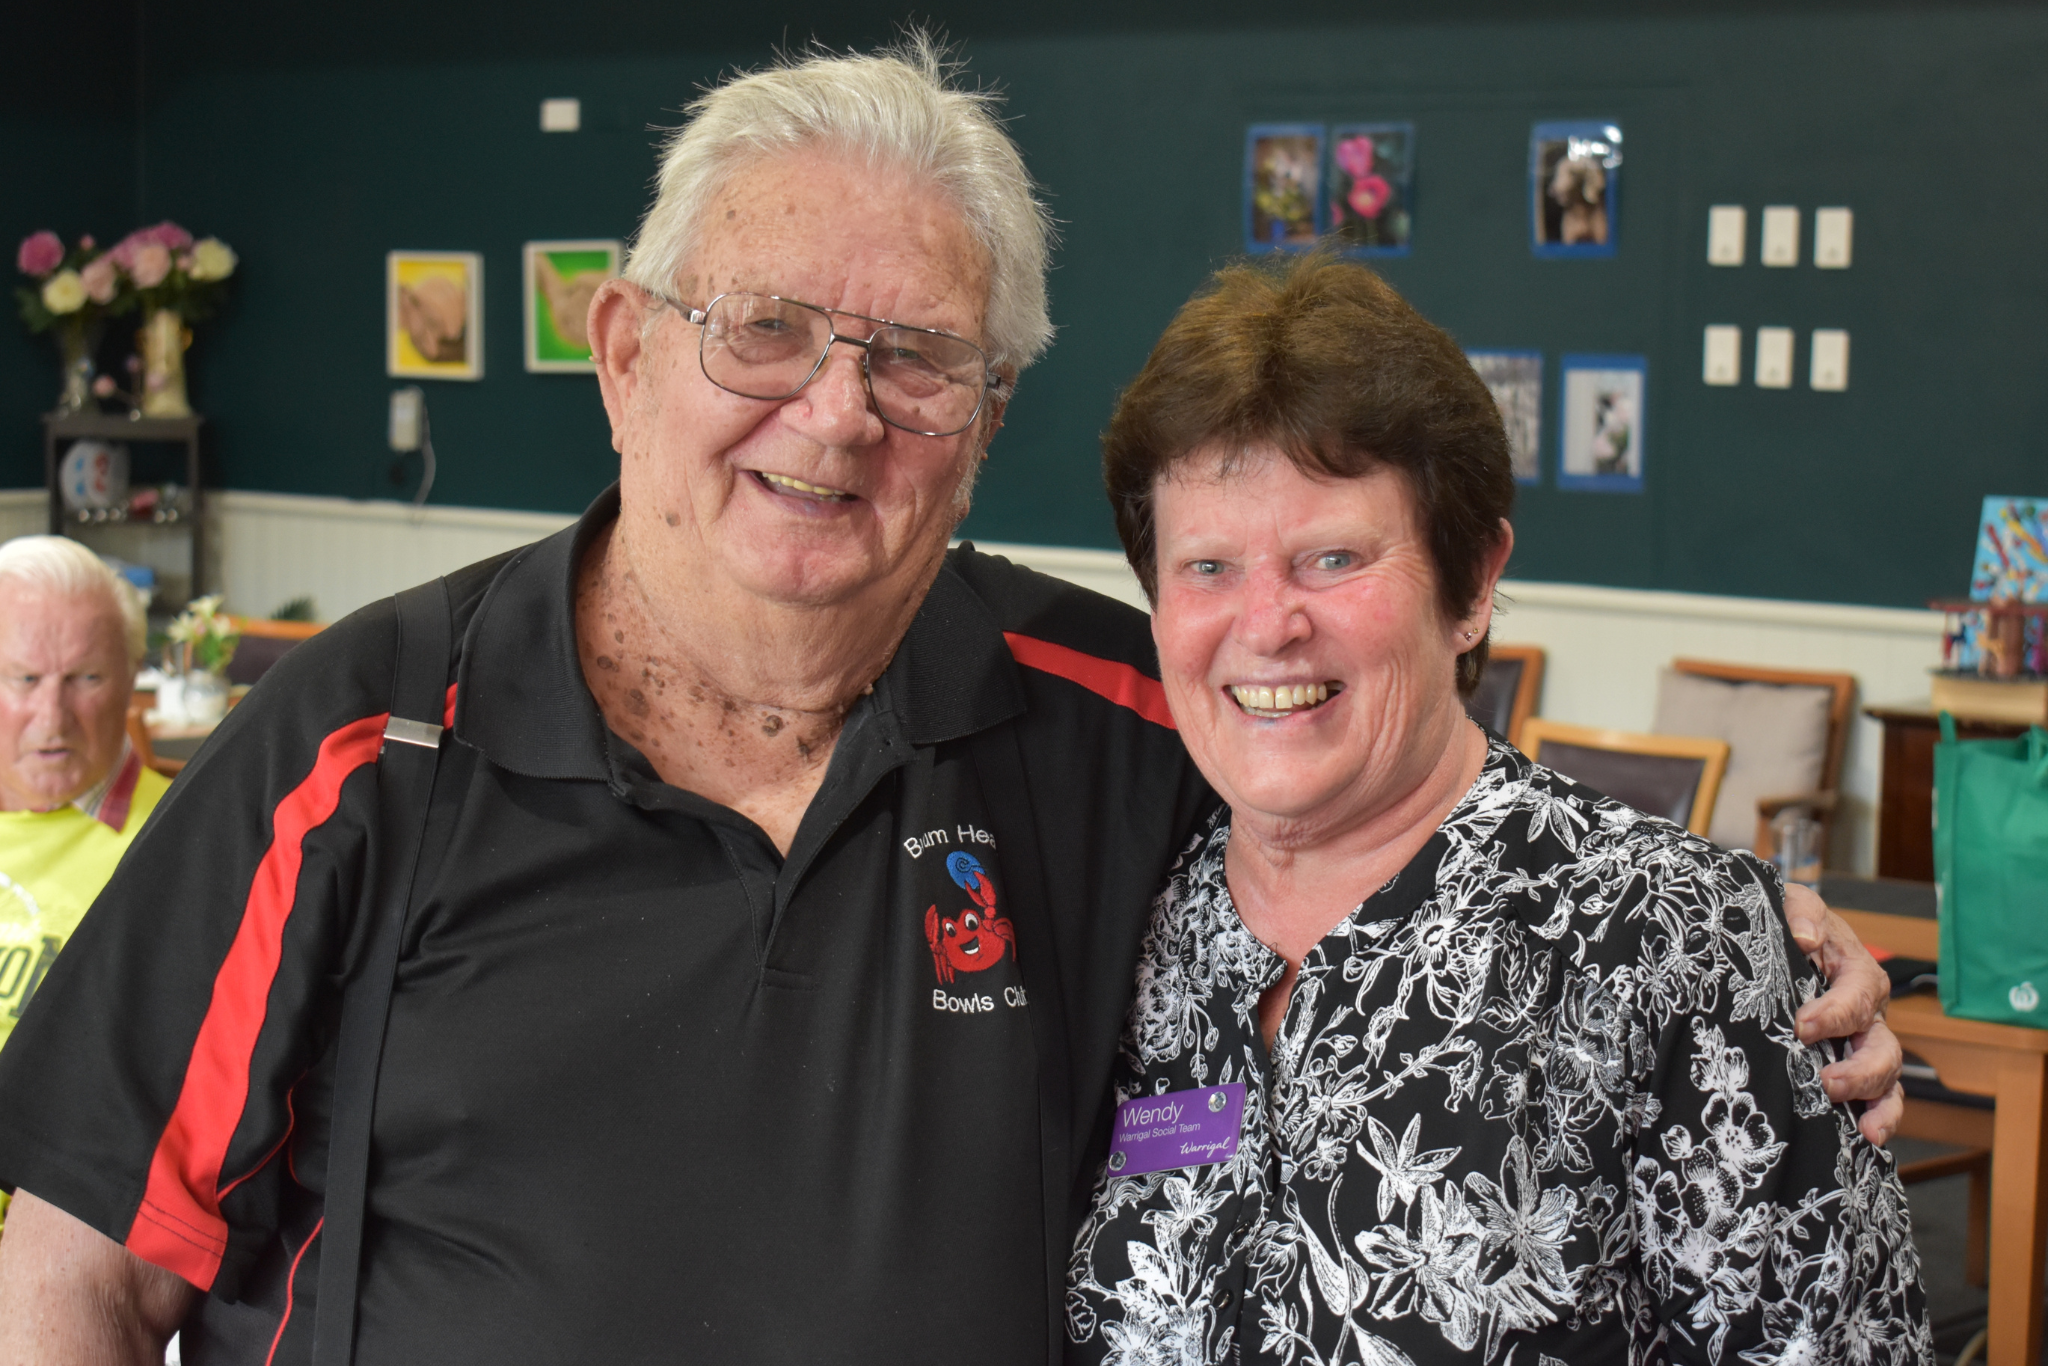 A warrigal social customer and staff member smile at the camera with their arms around each other in a friendly manner.